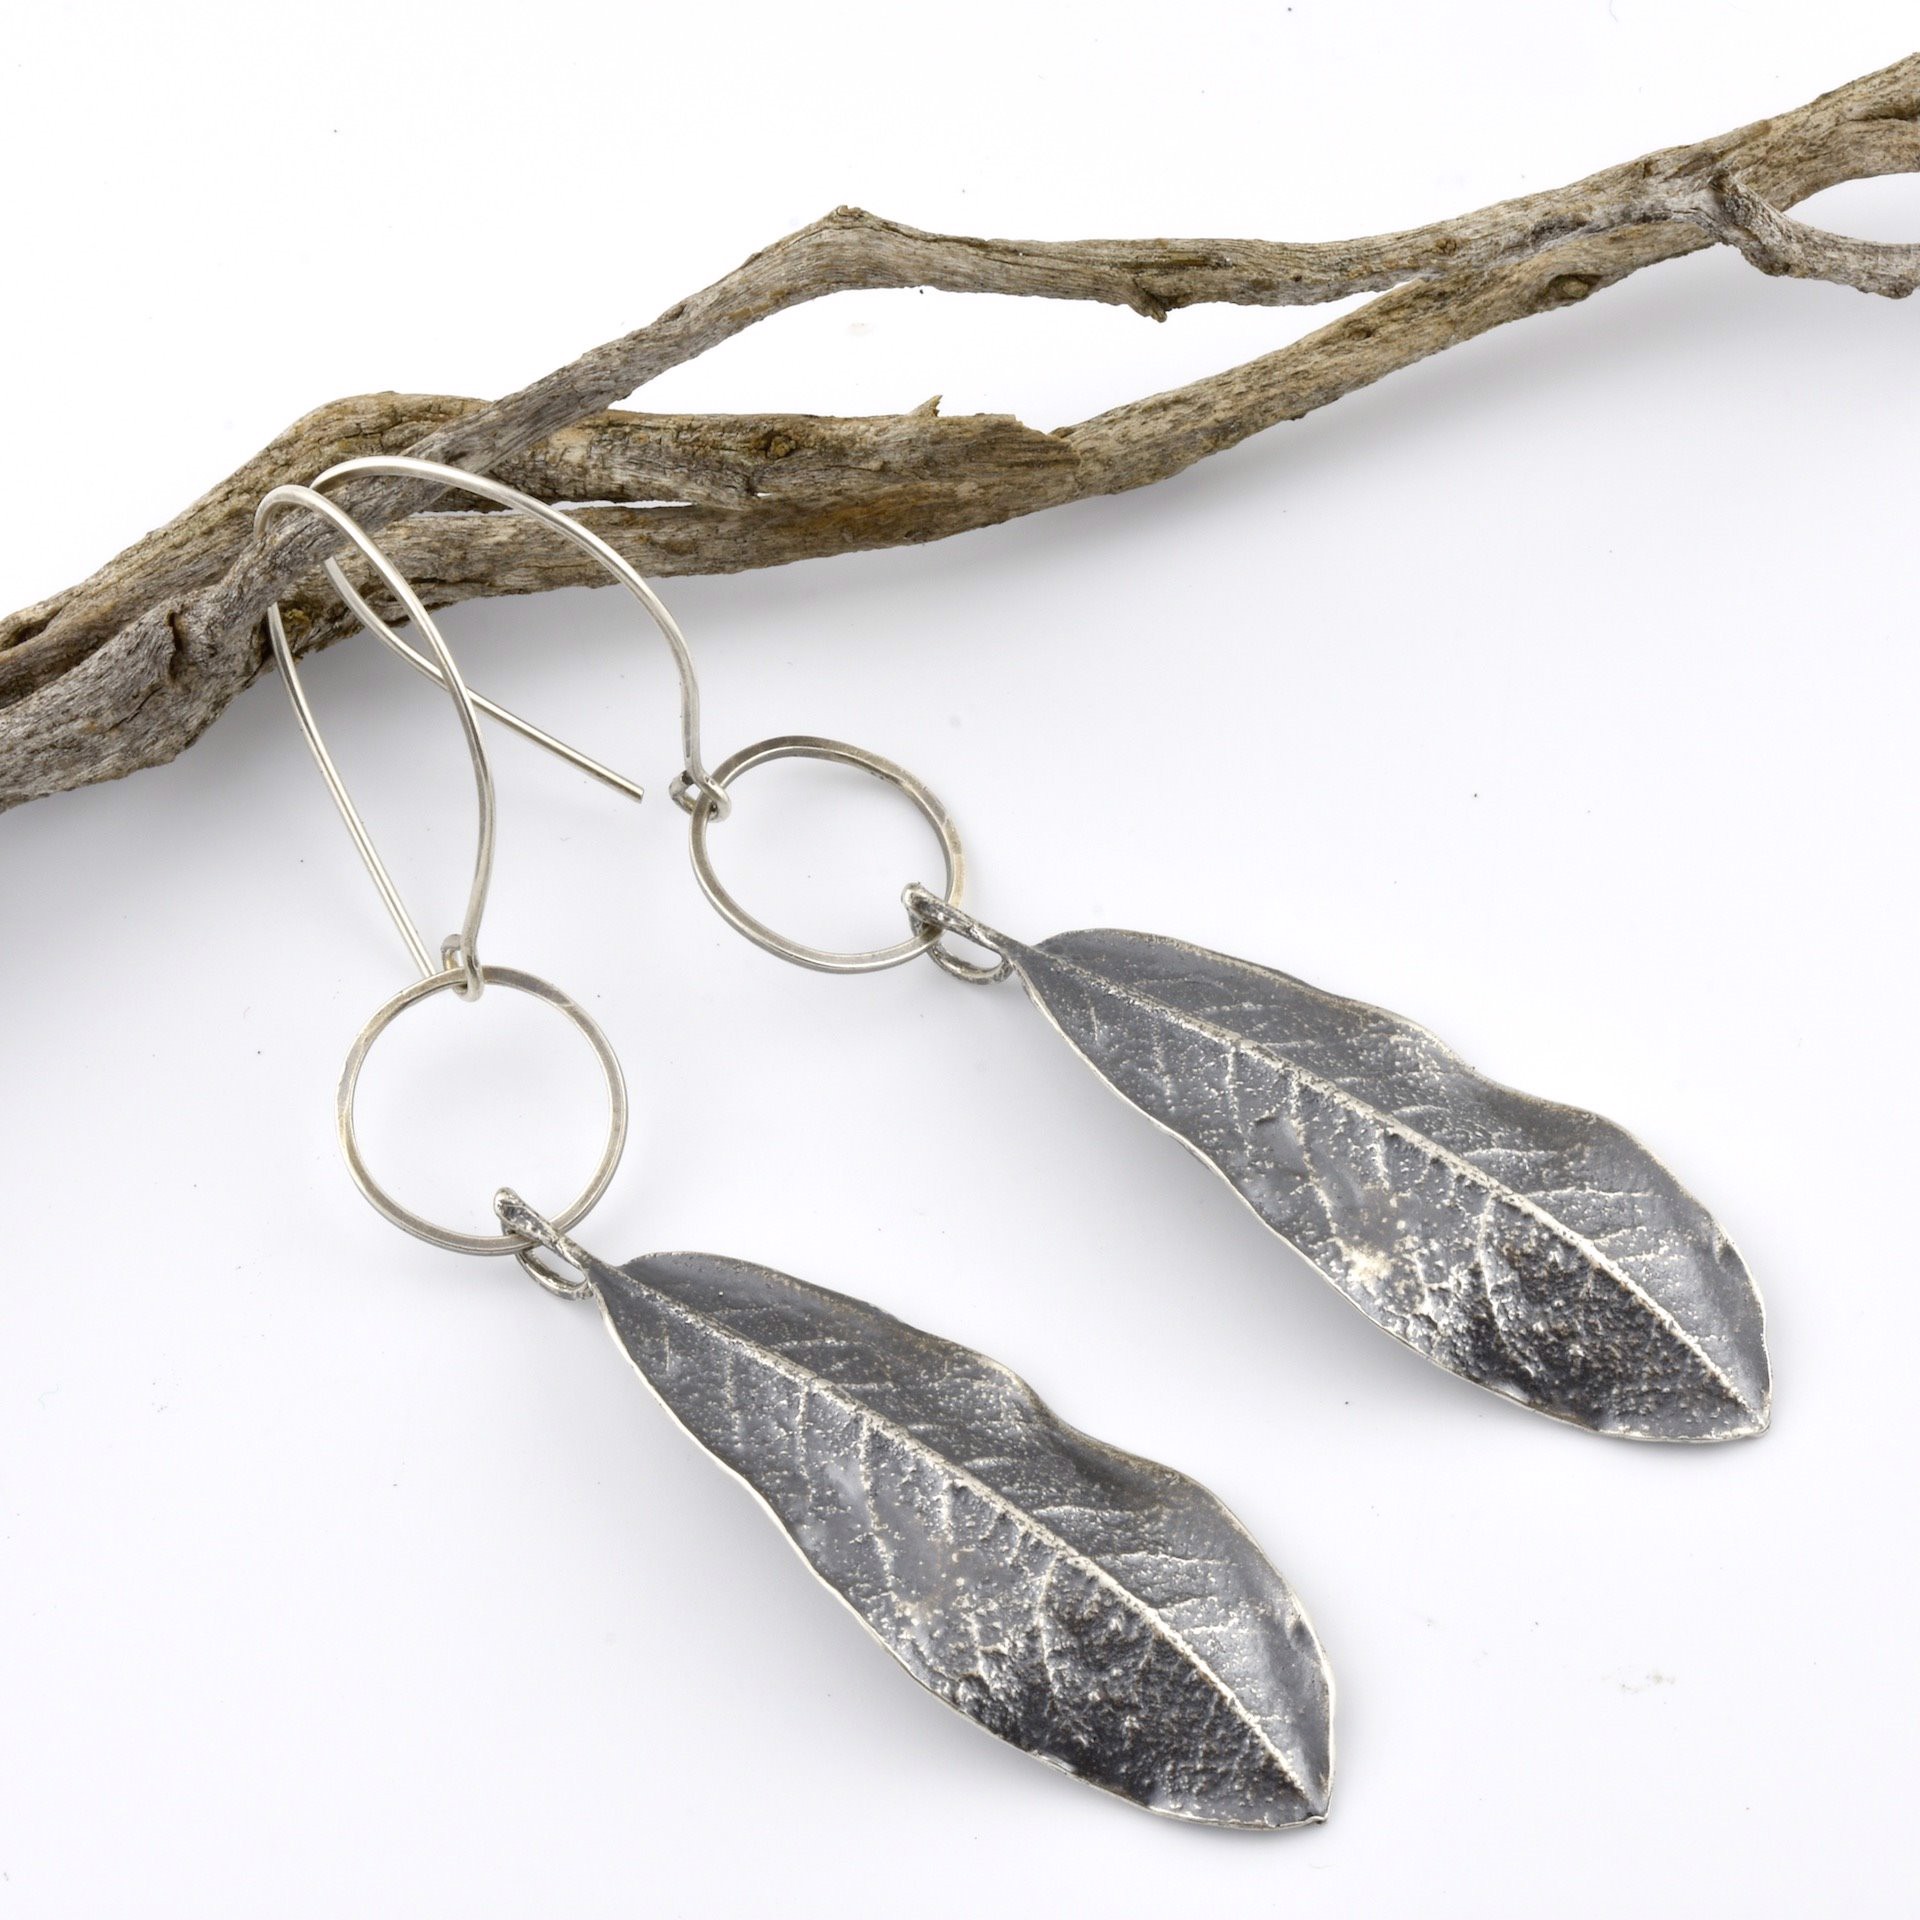 Long Myrtle Wood Leaves on Big Wire by April Ottey